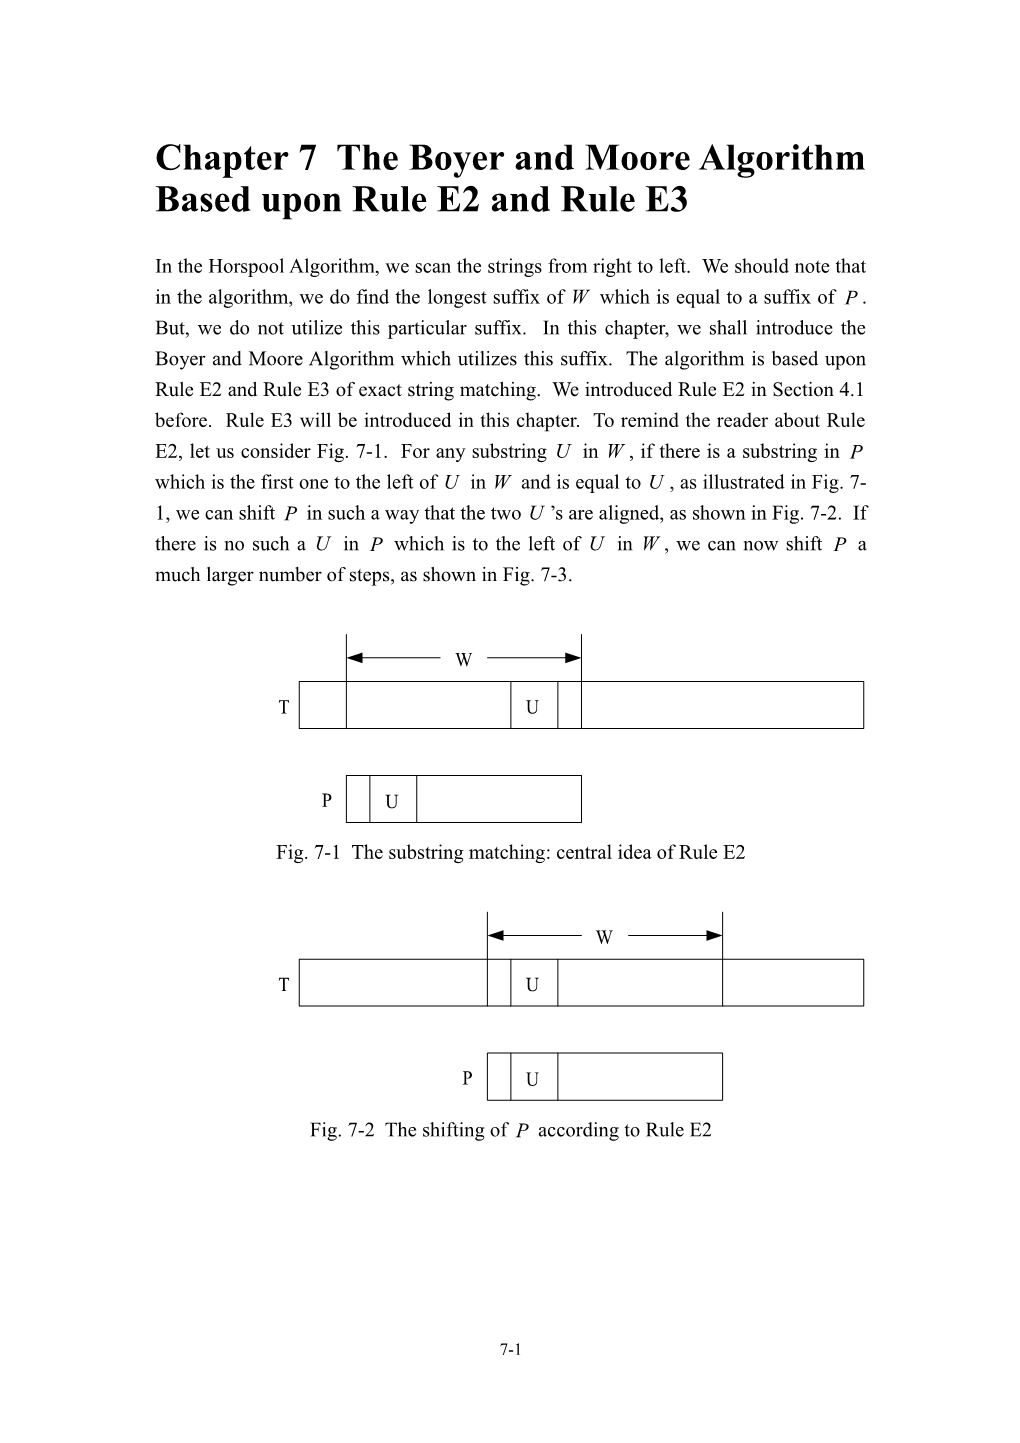 Chapter 7 the Boyer and Moore Algorithm Based Upon Rule 1 and Rule 2